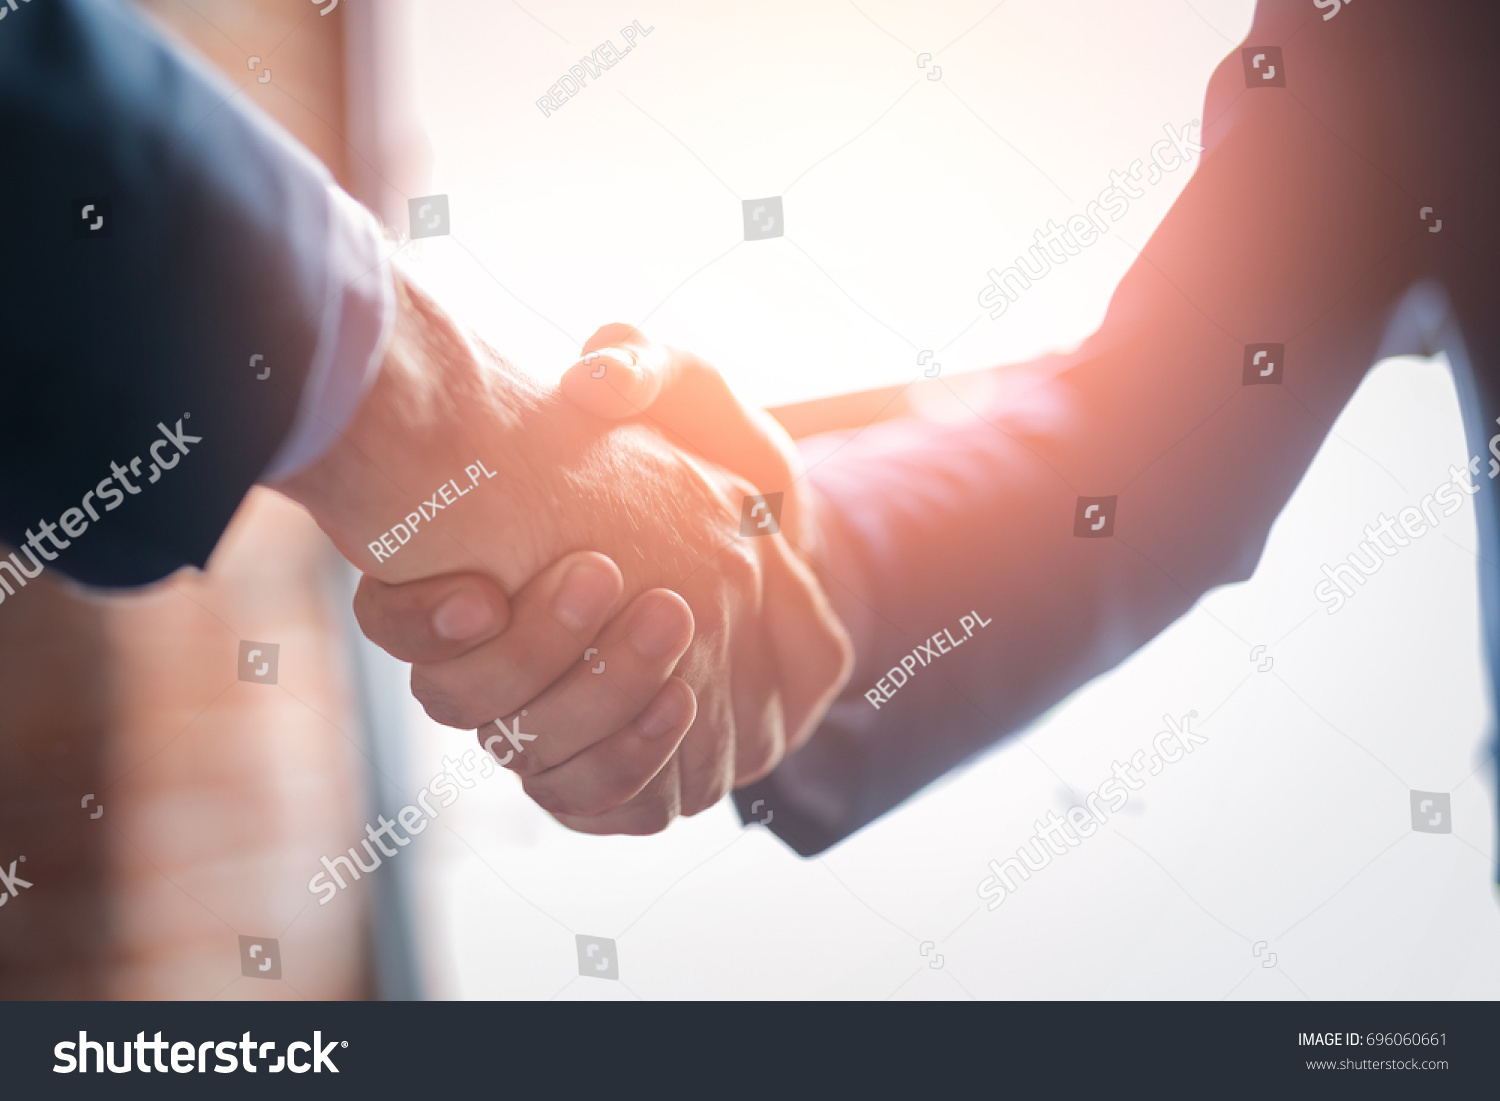 Business people shaking hands, finishing up meeting. Successful businessmen handshaking after good deal. #696060661